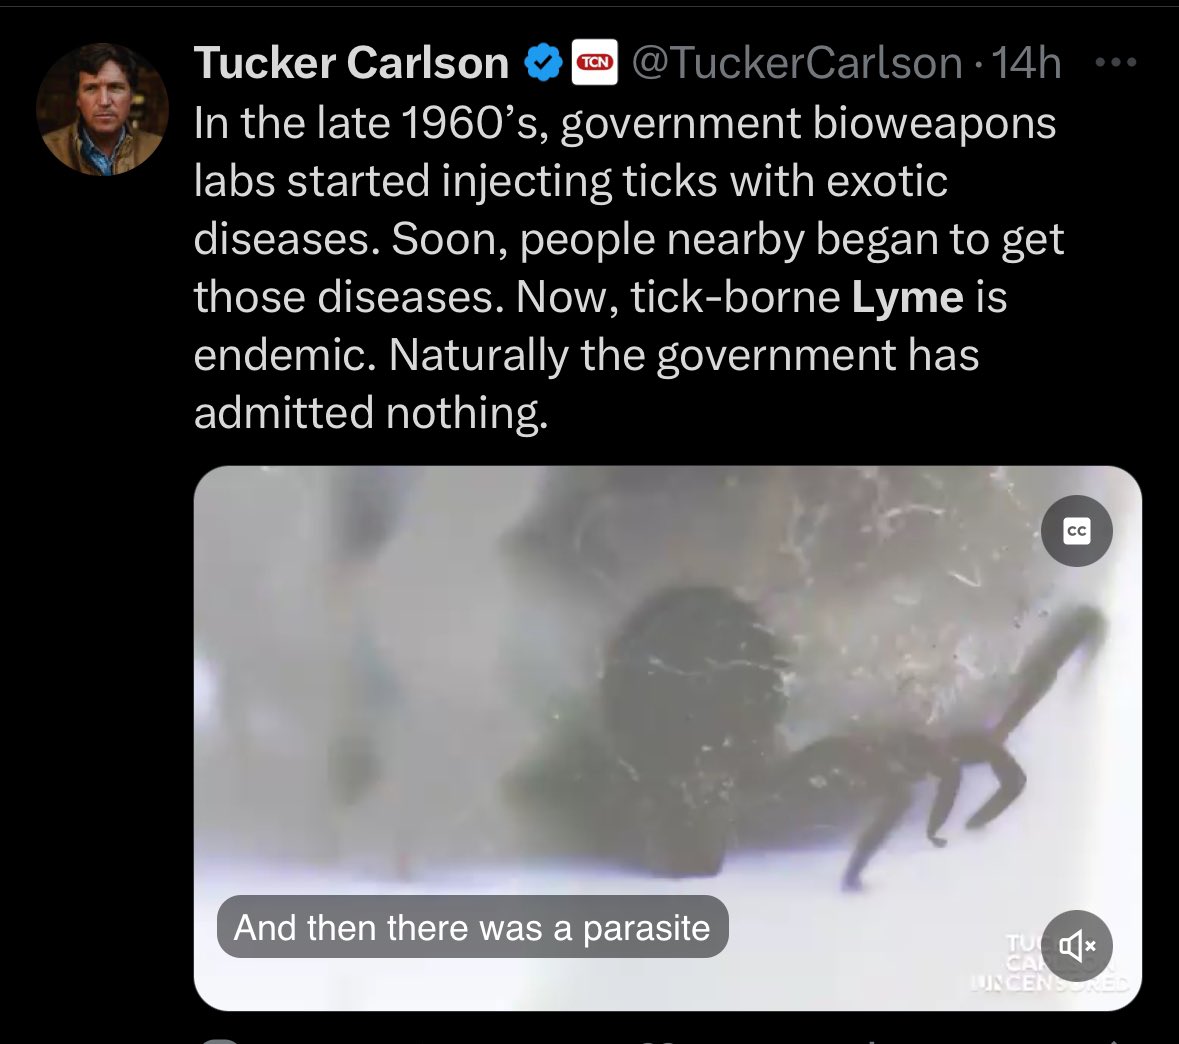 Tucker Carlson wasn’t satisfied with all the bullshit he spread about COVID, now he’s lying about the proliferation of Lyme disease. The bacterium has existed in North America for 60,000 years. Real scientists tie the epidemic to deforestation & the population explosion of deer.